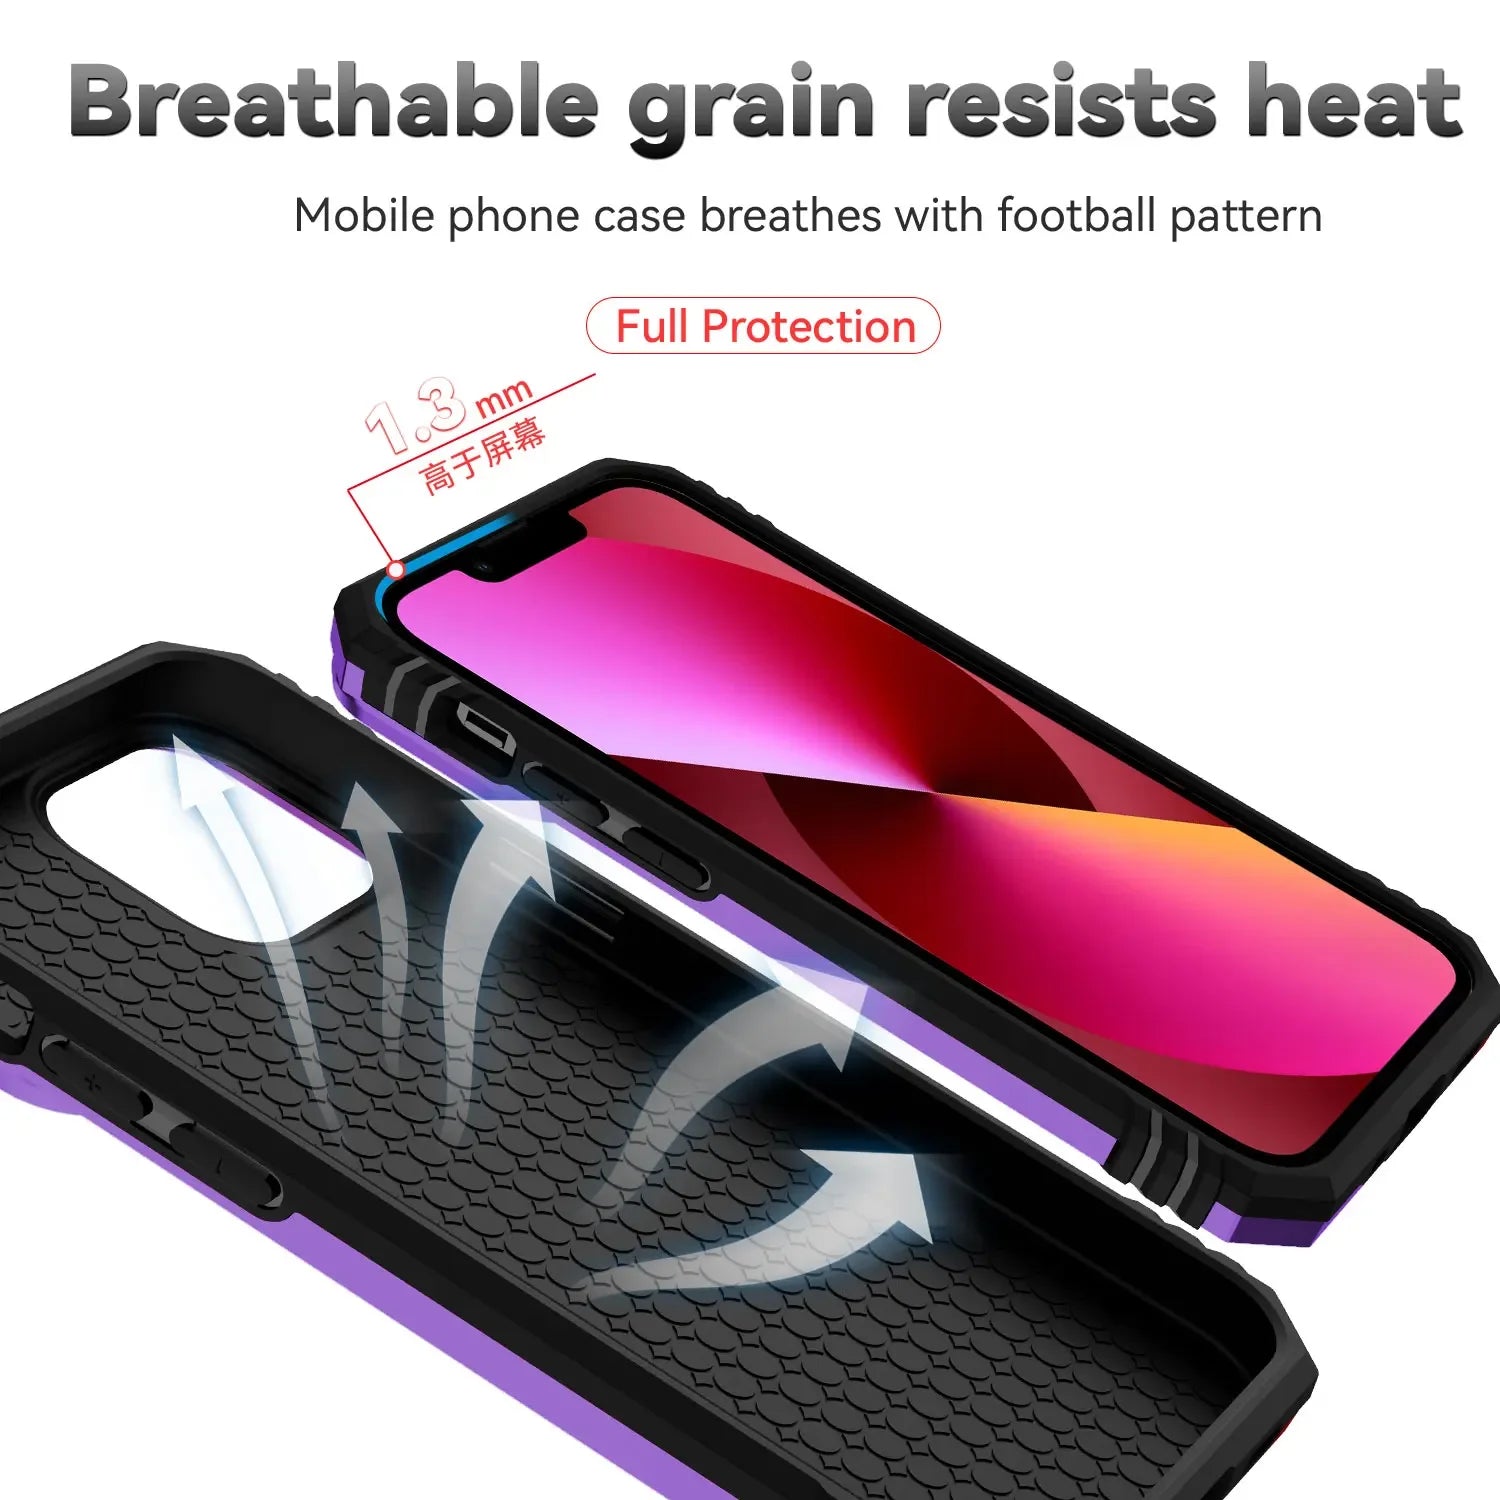 360 Degree Swivel Ring Fall Prevention Car Magnetic Suction iPhone Case - DealJustDeal